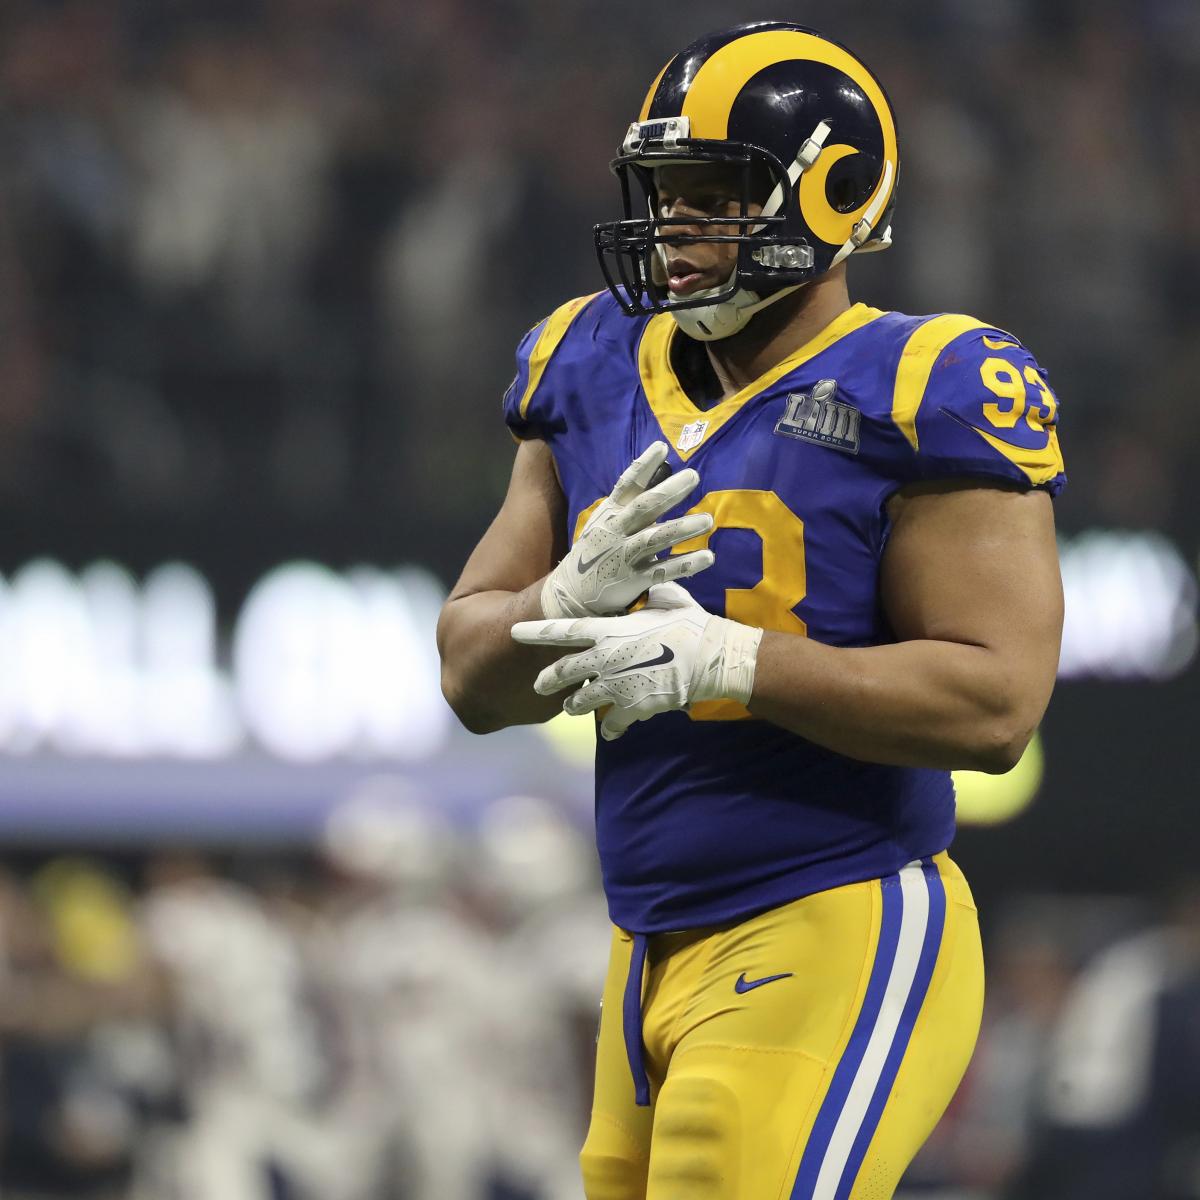 NFL Rumors Buzz and Predictions After Day 2 of 2019 Free